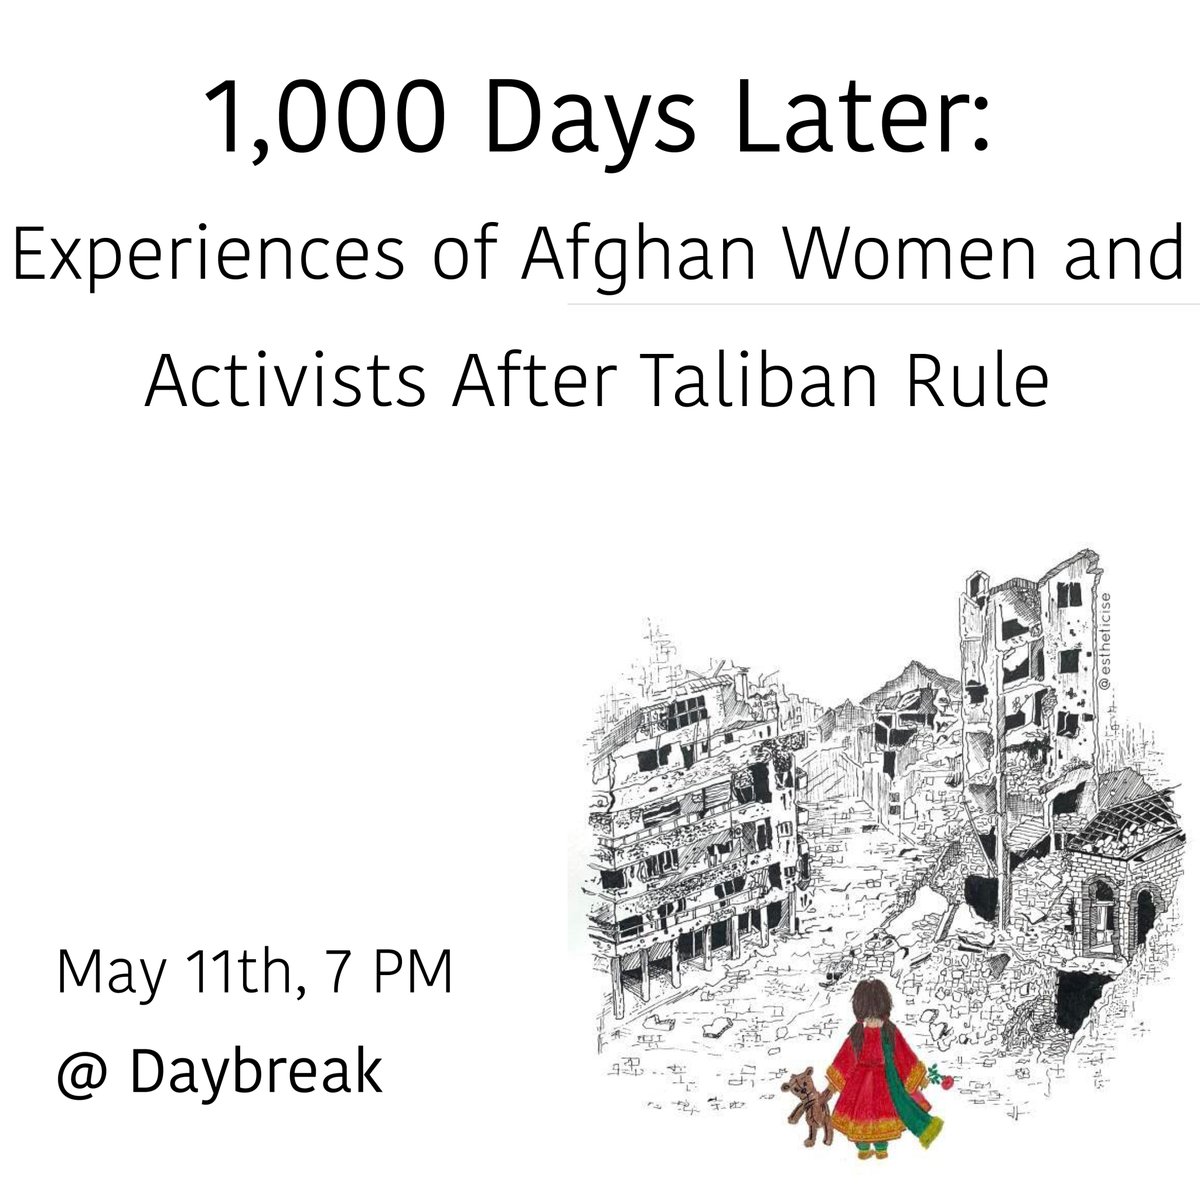 Next month! Join New Bloom on May 11th, 2024 to hear the first-hand experience of Afghan women and activists who have been actively engaged in building initiatives for Afghanistan, on the 1,000th day after Afghanistan's fall to the Taliban Link: facebook.com/events/7406622…